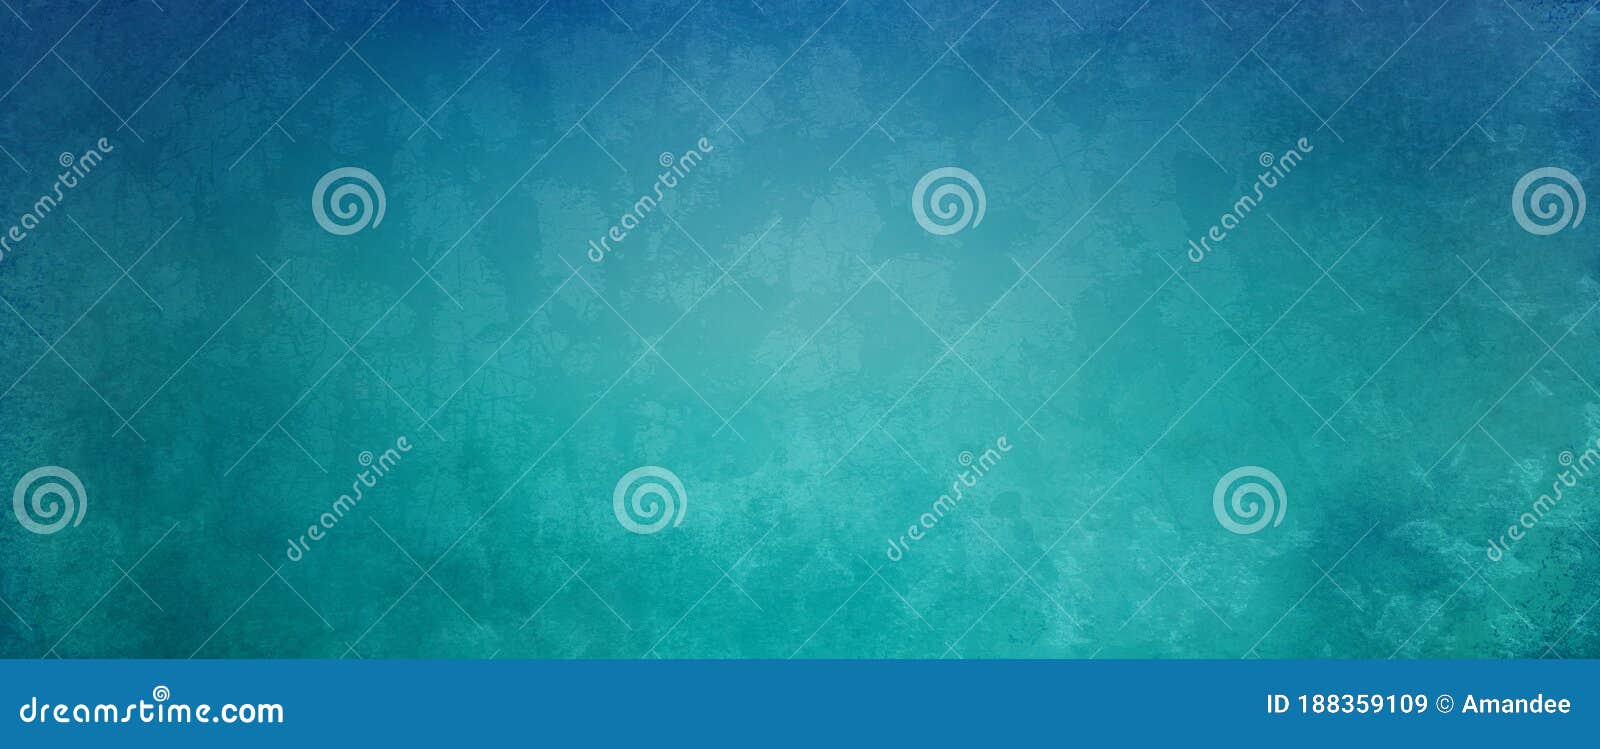 abstract blue green background with soft bright center glowing with light center and dark blue border with old vintage grunge text